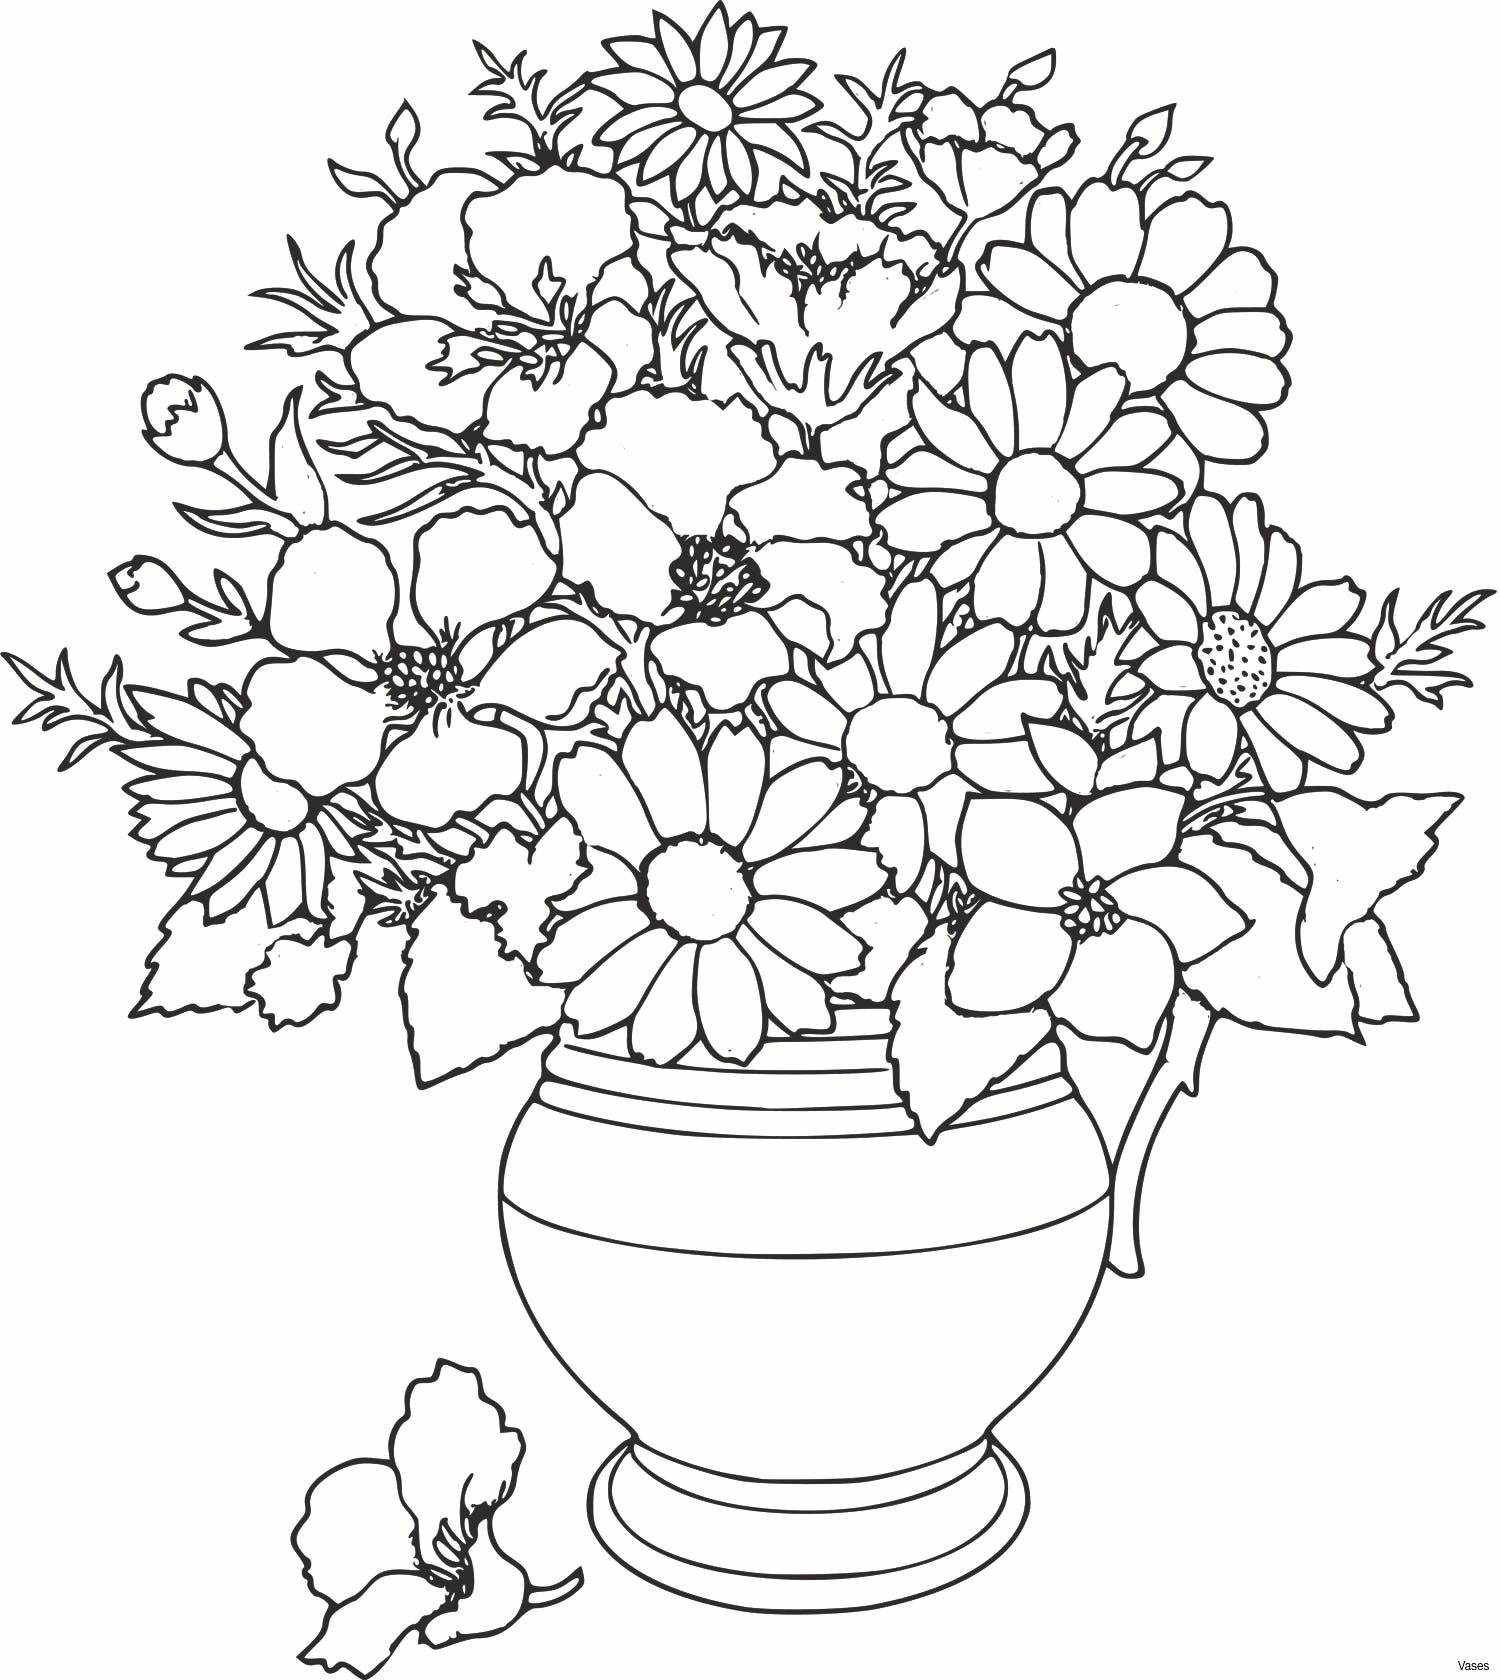 27 Popular Watering Can Flower Vase 2024 free download watering can flower vase of flower in a vase beautiful flowers coloring pages luxury cool vases pertaining to flower in a vase beautiful flowers coloring pages luxury cool vases flower vase 